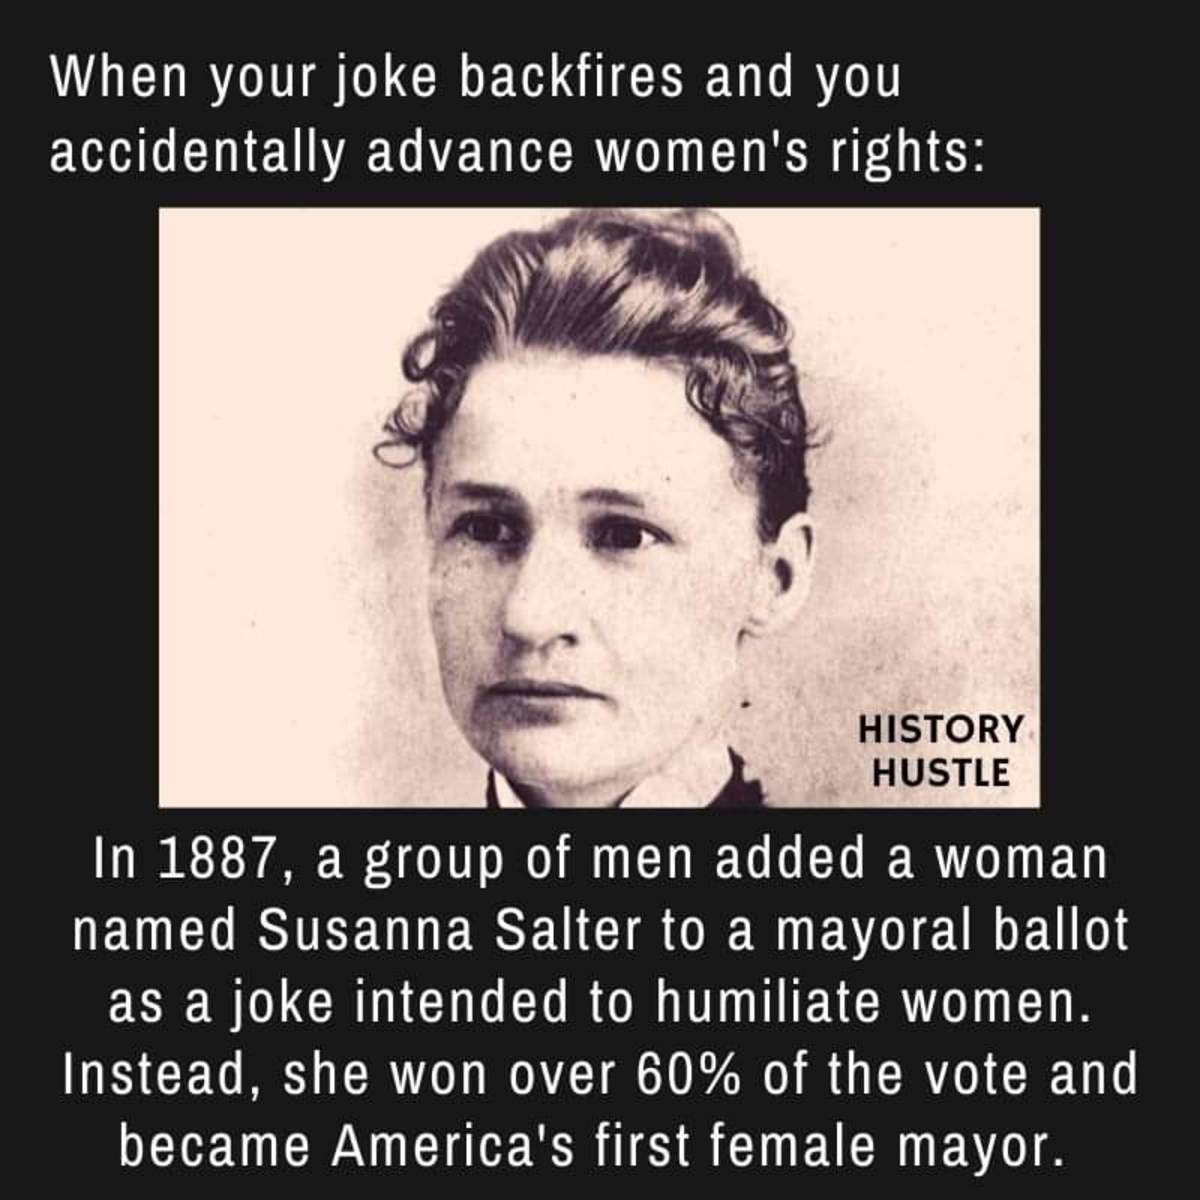 susanna madora salter - When your joke backfires and you accidentally advance women's rights History Hustle In 1887, a group of men added a woman named Susanna Salter to a mayoral ballot as a joke intended to humiliate women. Instead, she won over 60% of 